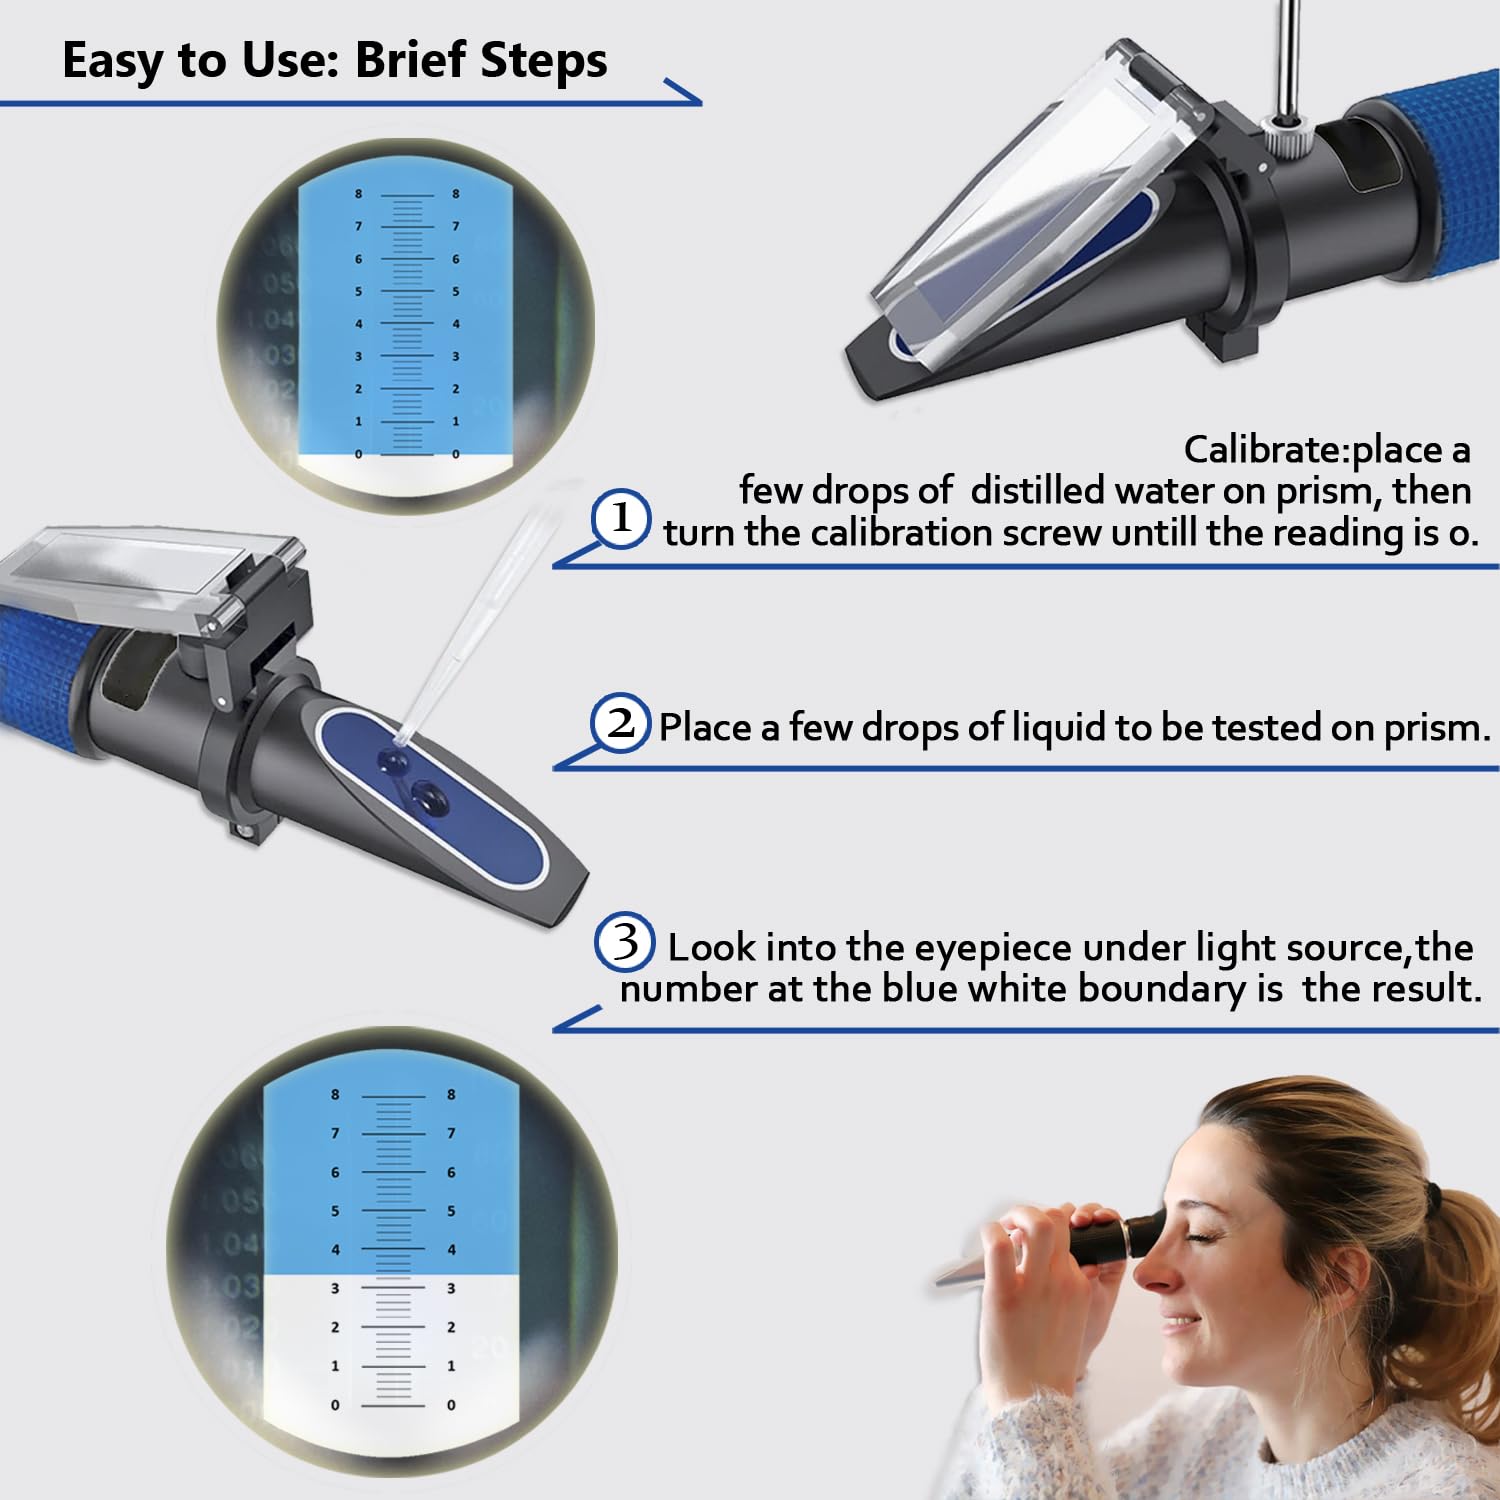 Aichose 0-80% Brix Meter Refractometer for Measuring Sugar Content in Fruit, Honey, Maple Syrup and Other Sugary Drink, with Automatic Temperature Compensation Function